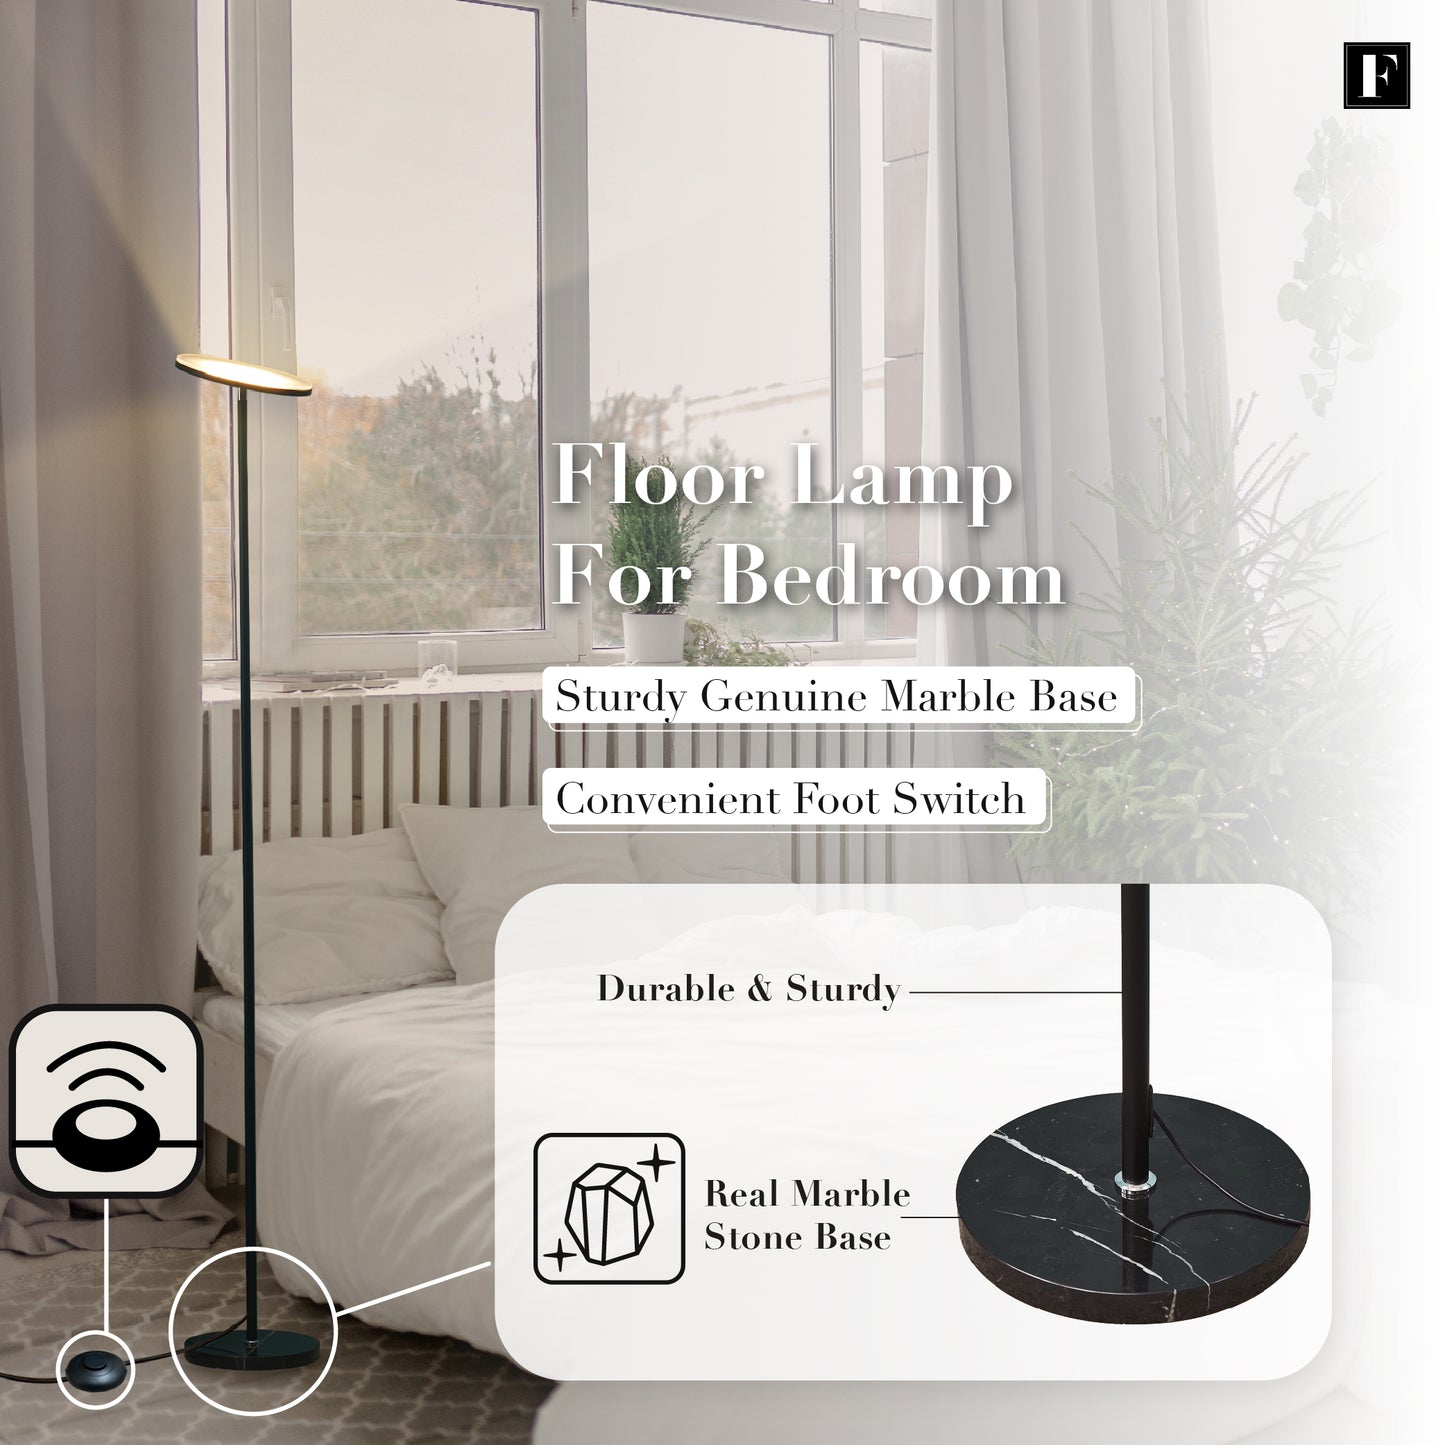 FENLO Felton Dimmable LED Torchiere Floor Lamp with Black Marble Base